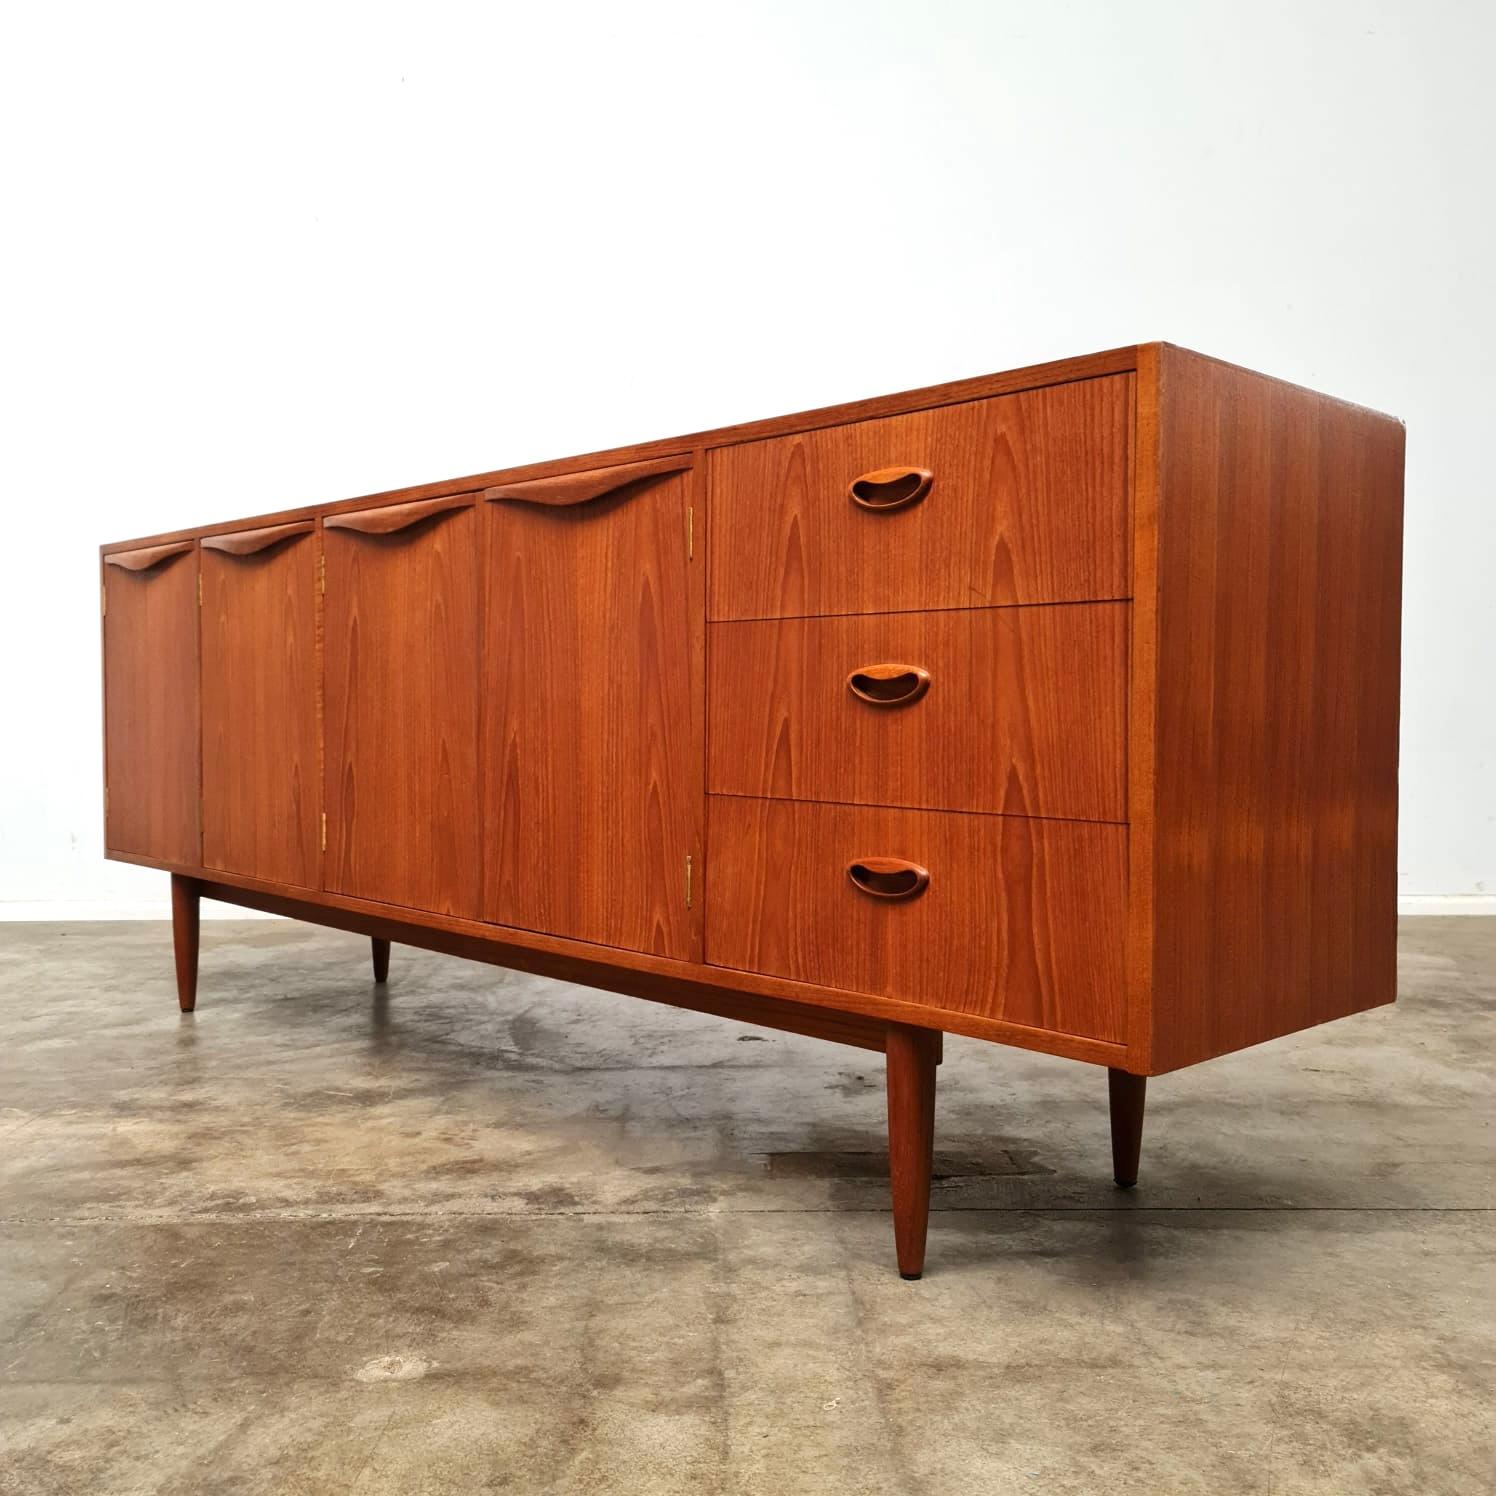 1967 Chiswell Wave Handle sideboard. Features four doors, three drawers and a cutlery drawer. Stamped 7 Sep 1967. 

This sideboard has been sanded and refinished with three coats of satin hardwax oil. presents very well with a few small repairs